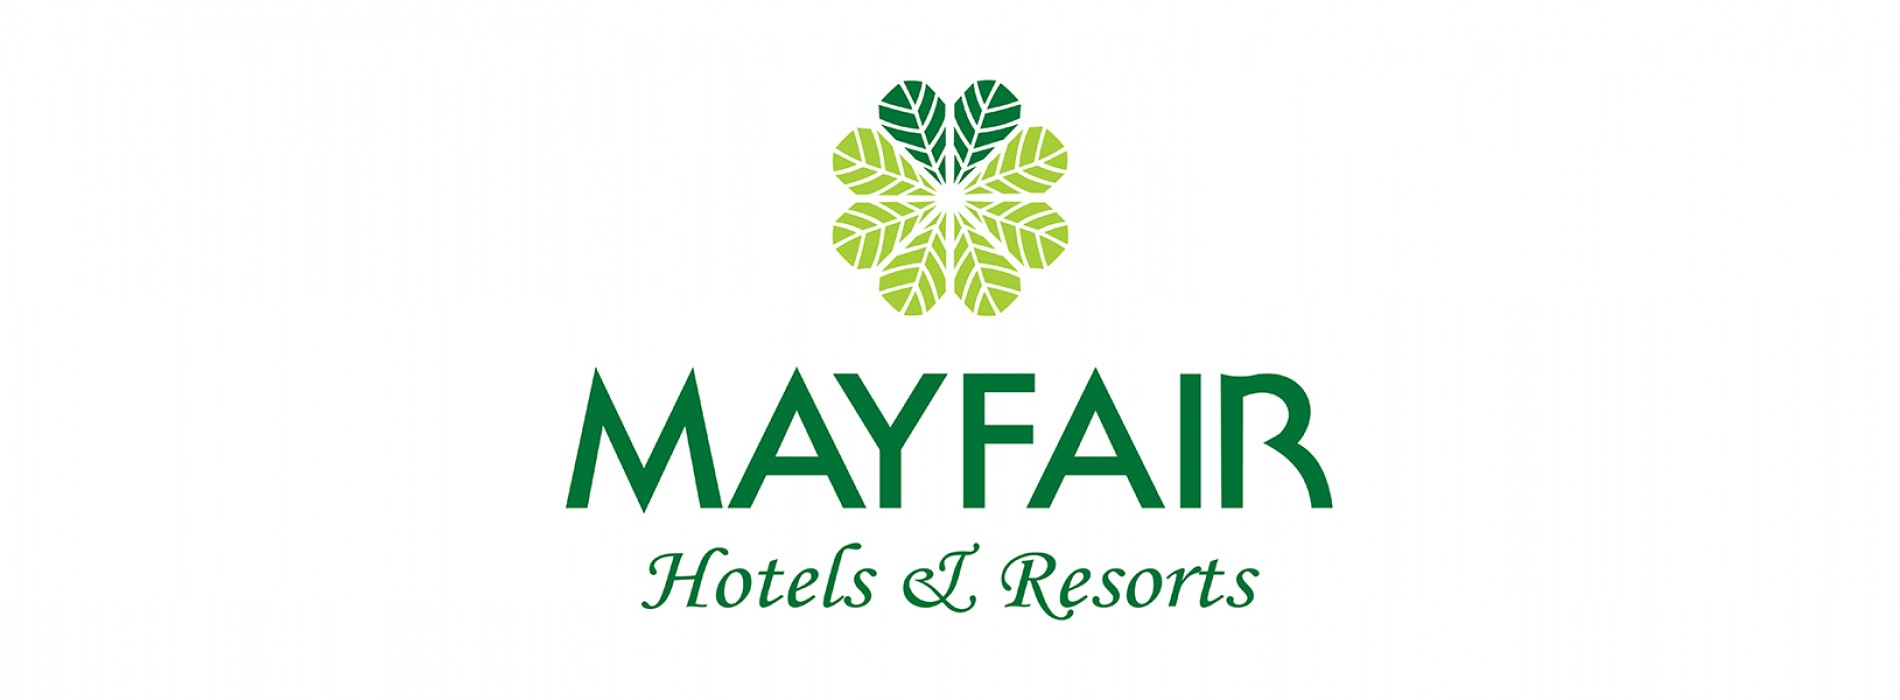 Mayfair Hotels & Resorts appoints Rishi Puri as Senior Vice President – Operations